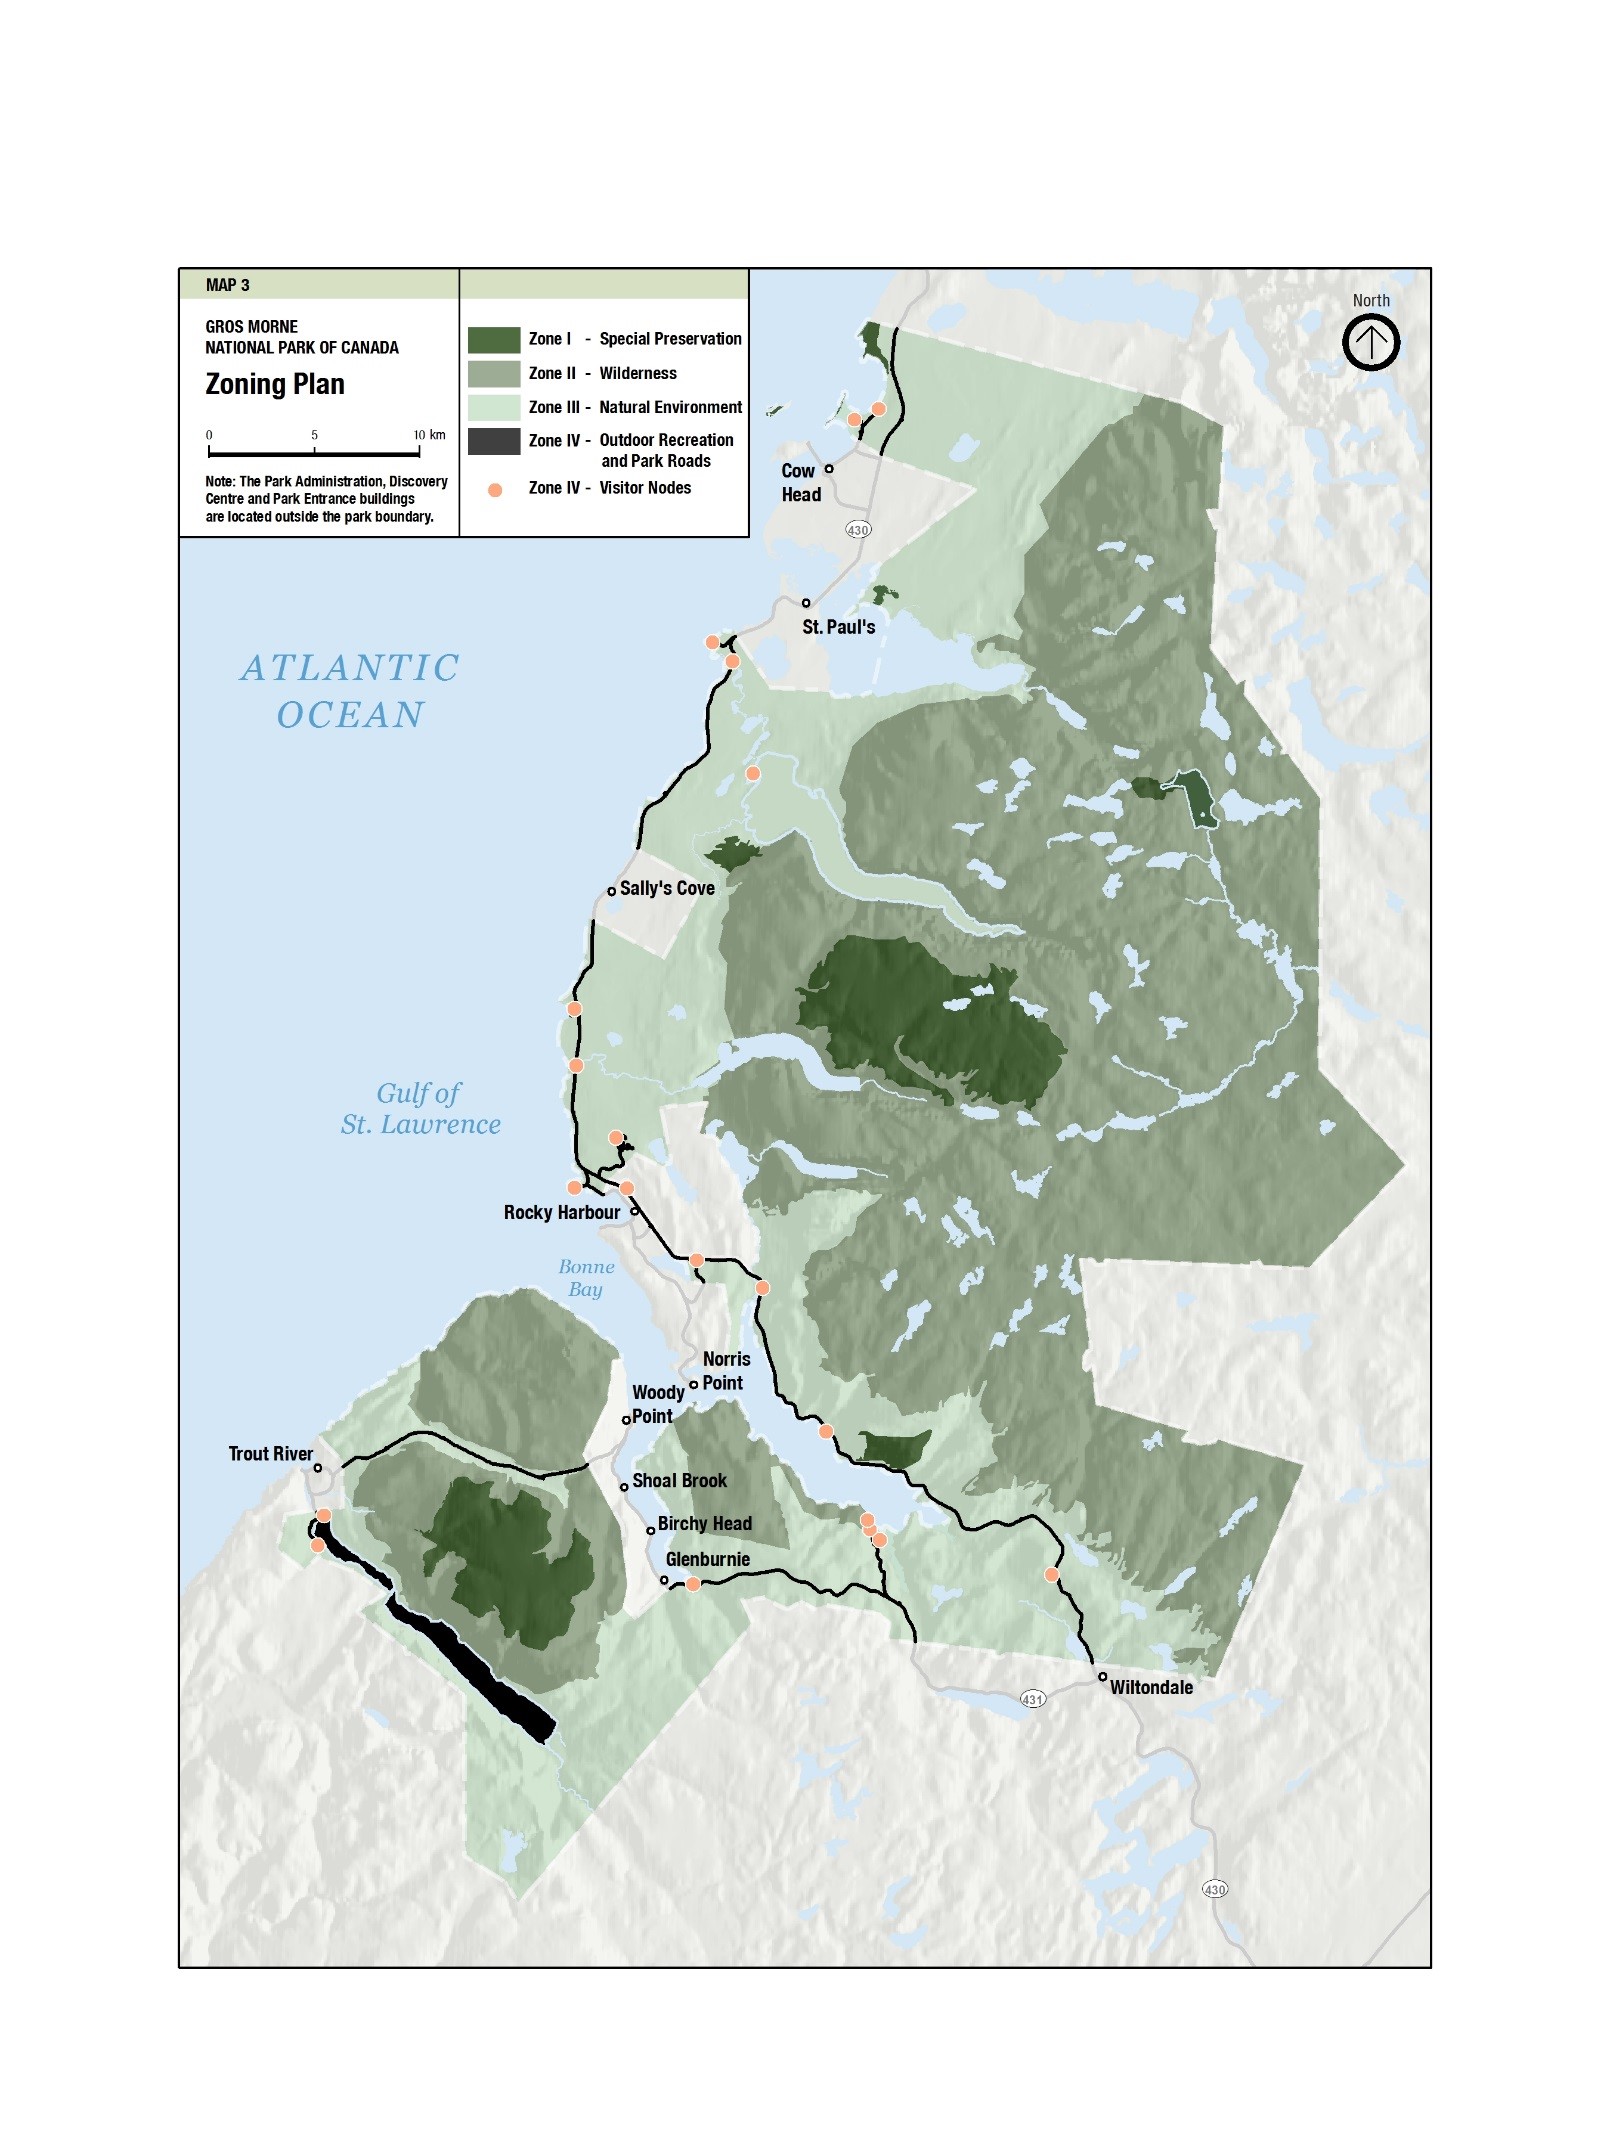 A map of the area zone designations for Gros Morne National Park